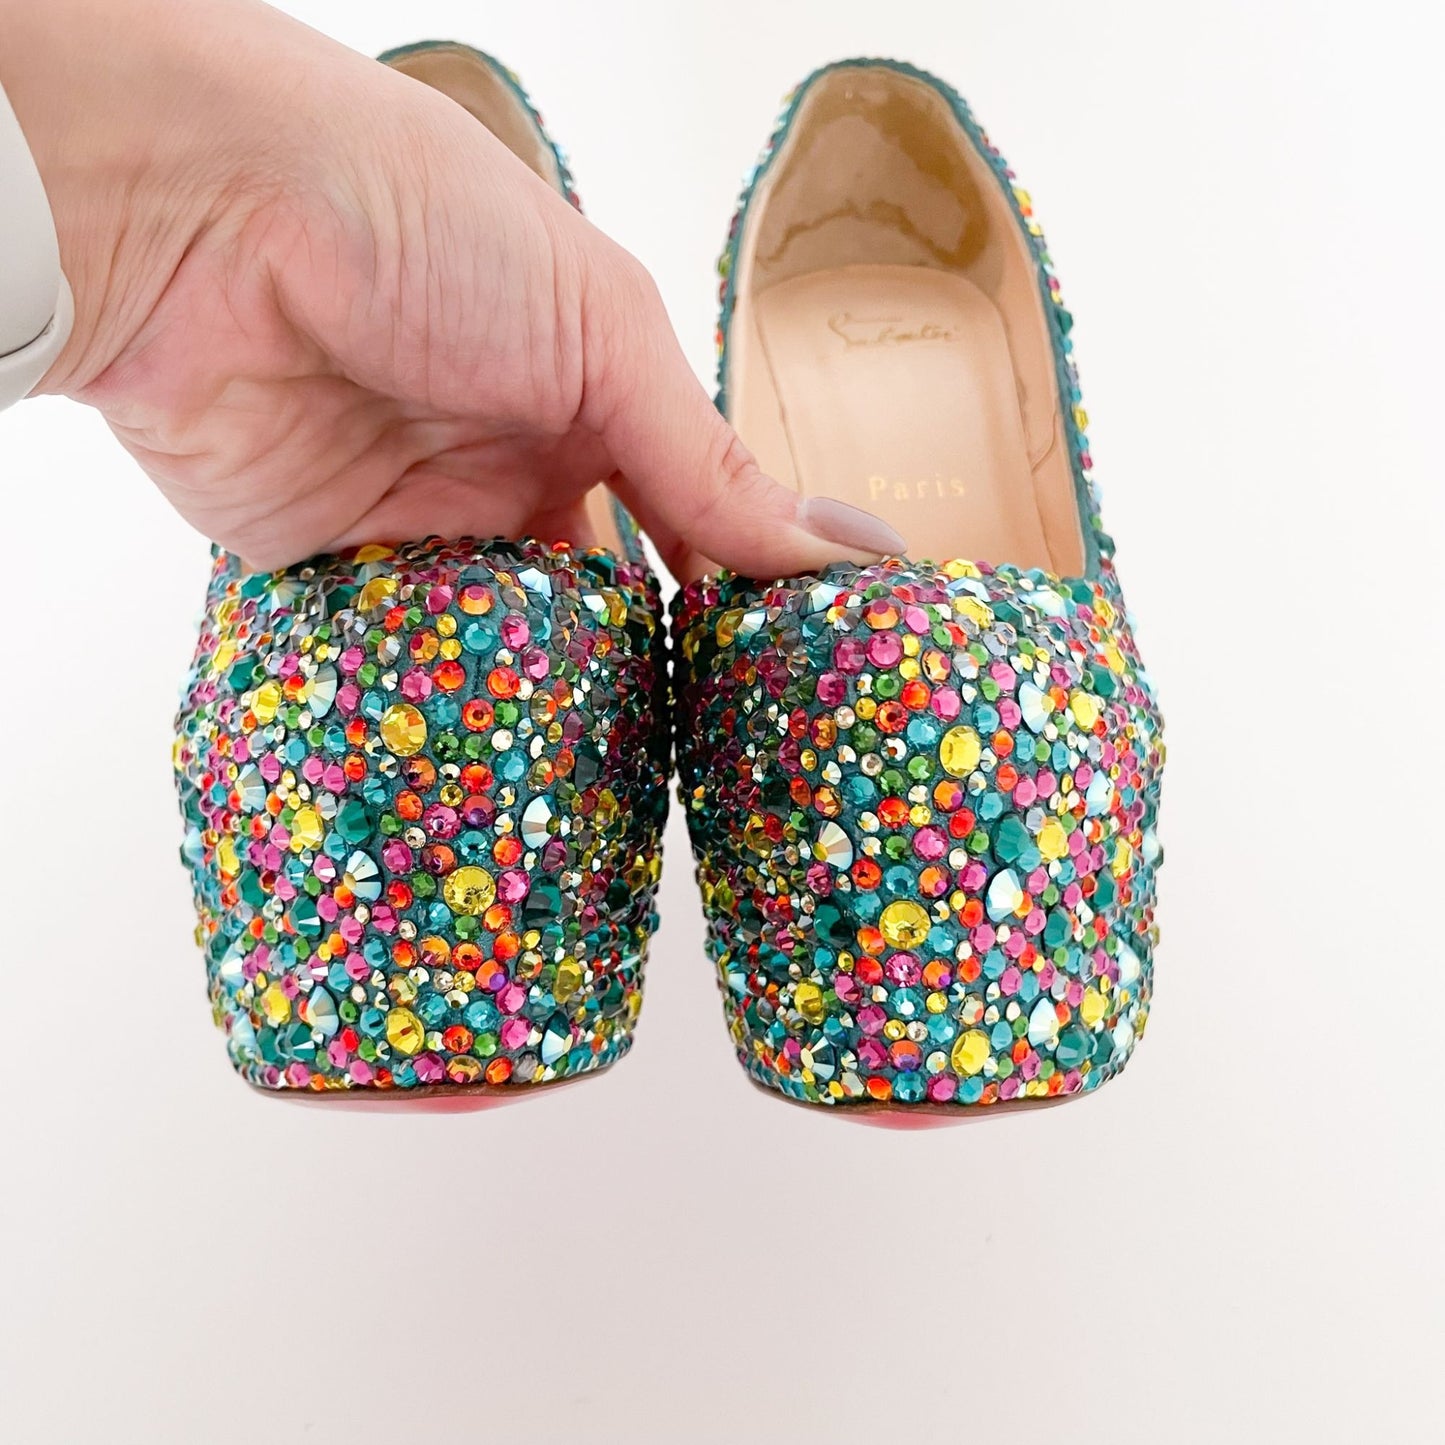 Christian Louboutin Daffodile 160 Pumps in Multicolor Crystal-Embellished Teal Suede Size 39.5